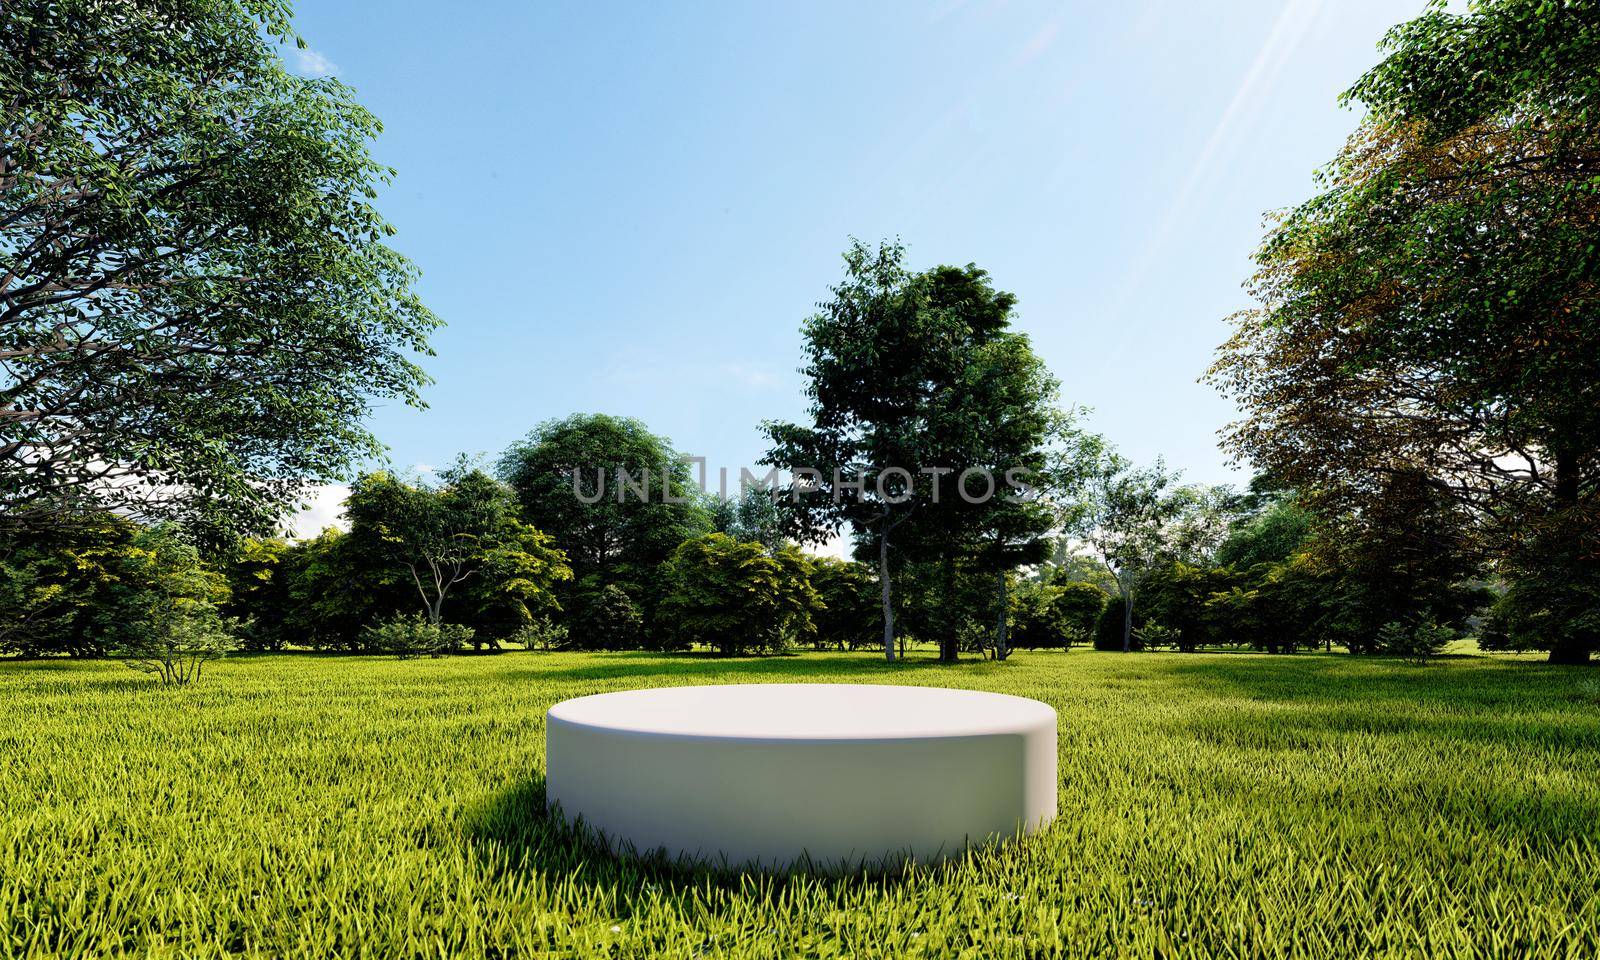 White minimal podium in natural public park background. Abstract and nature concept. 3D illustration rendering